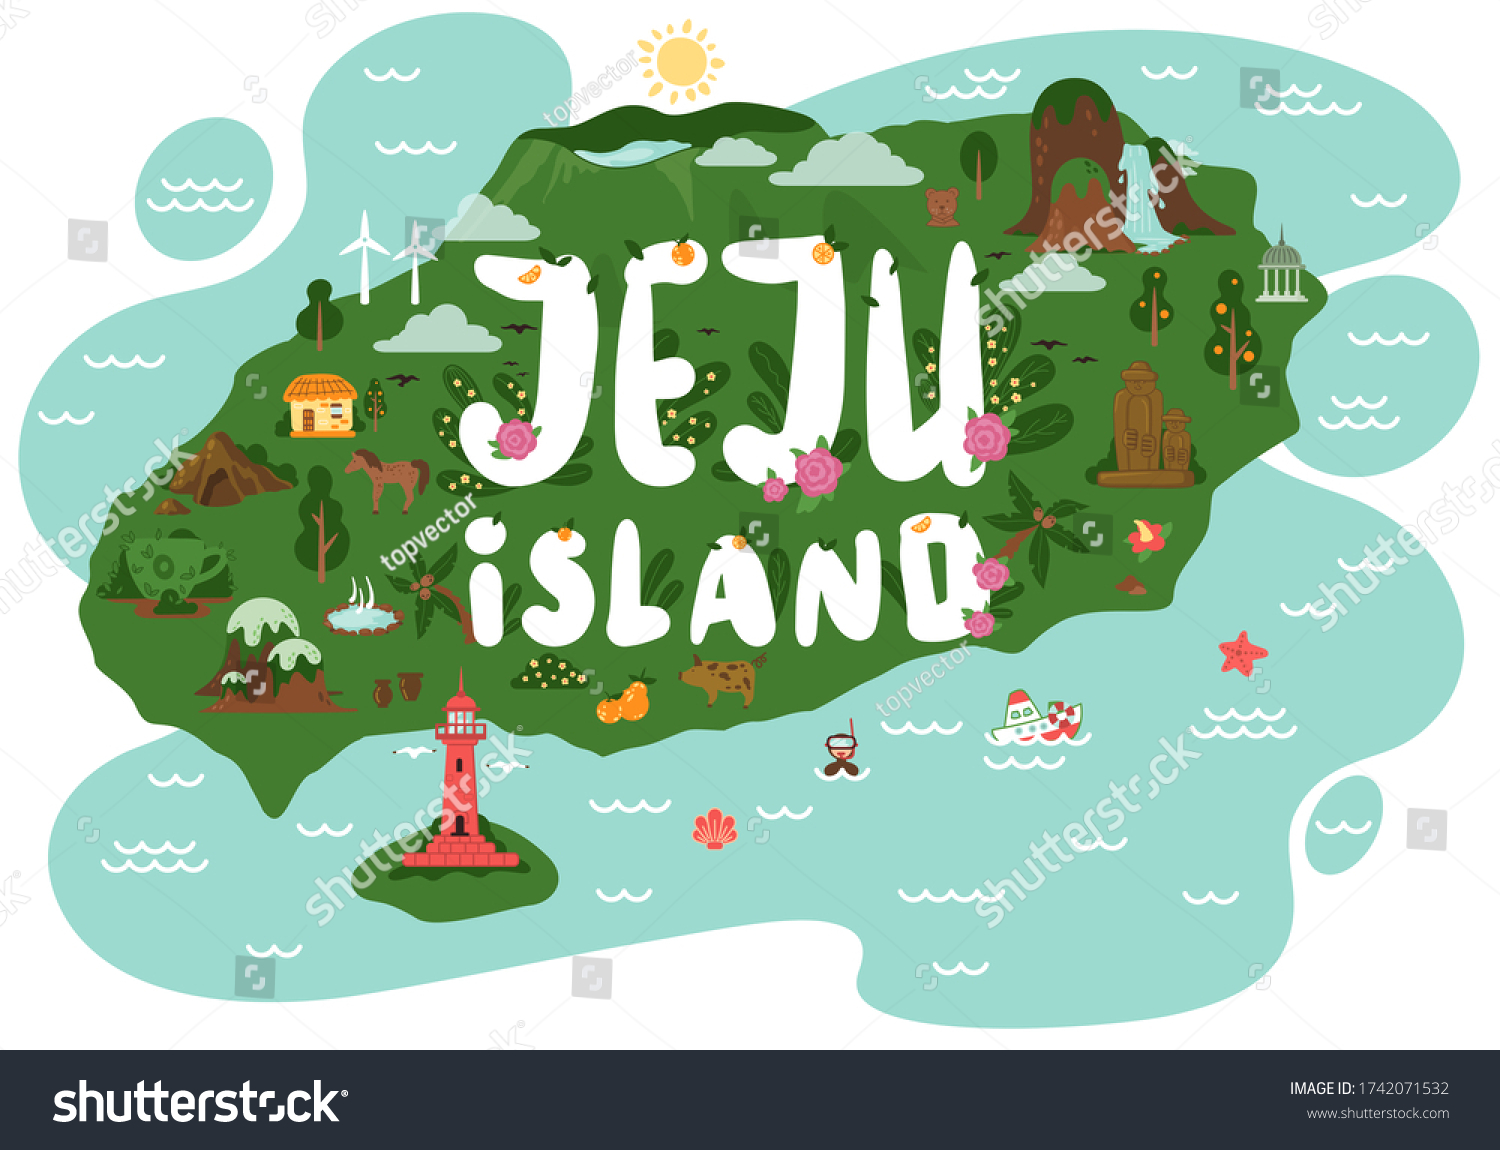 Welcome to Jeju island. Jeju tourist attractions such as hallim park, tourism diving, udo island lighthouse park, dolharubang, thatched house, dive tour. Jeju island in South Korea. Vector flat #1742071532